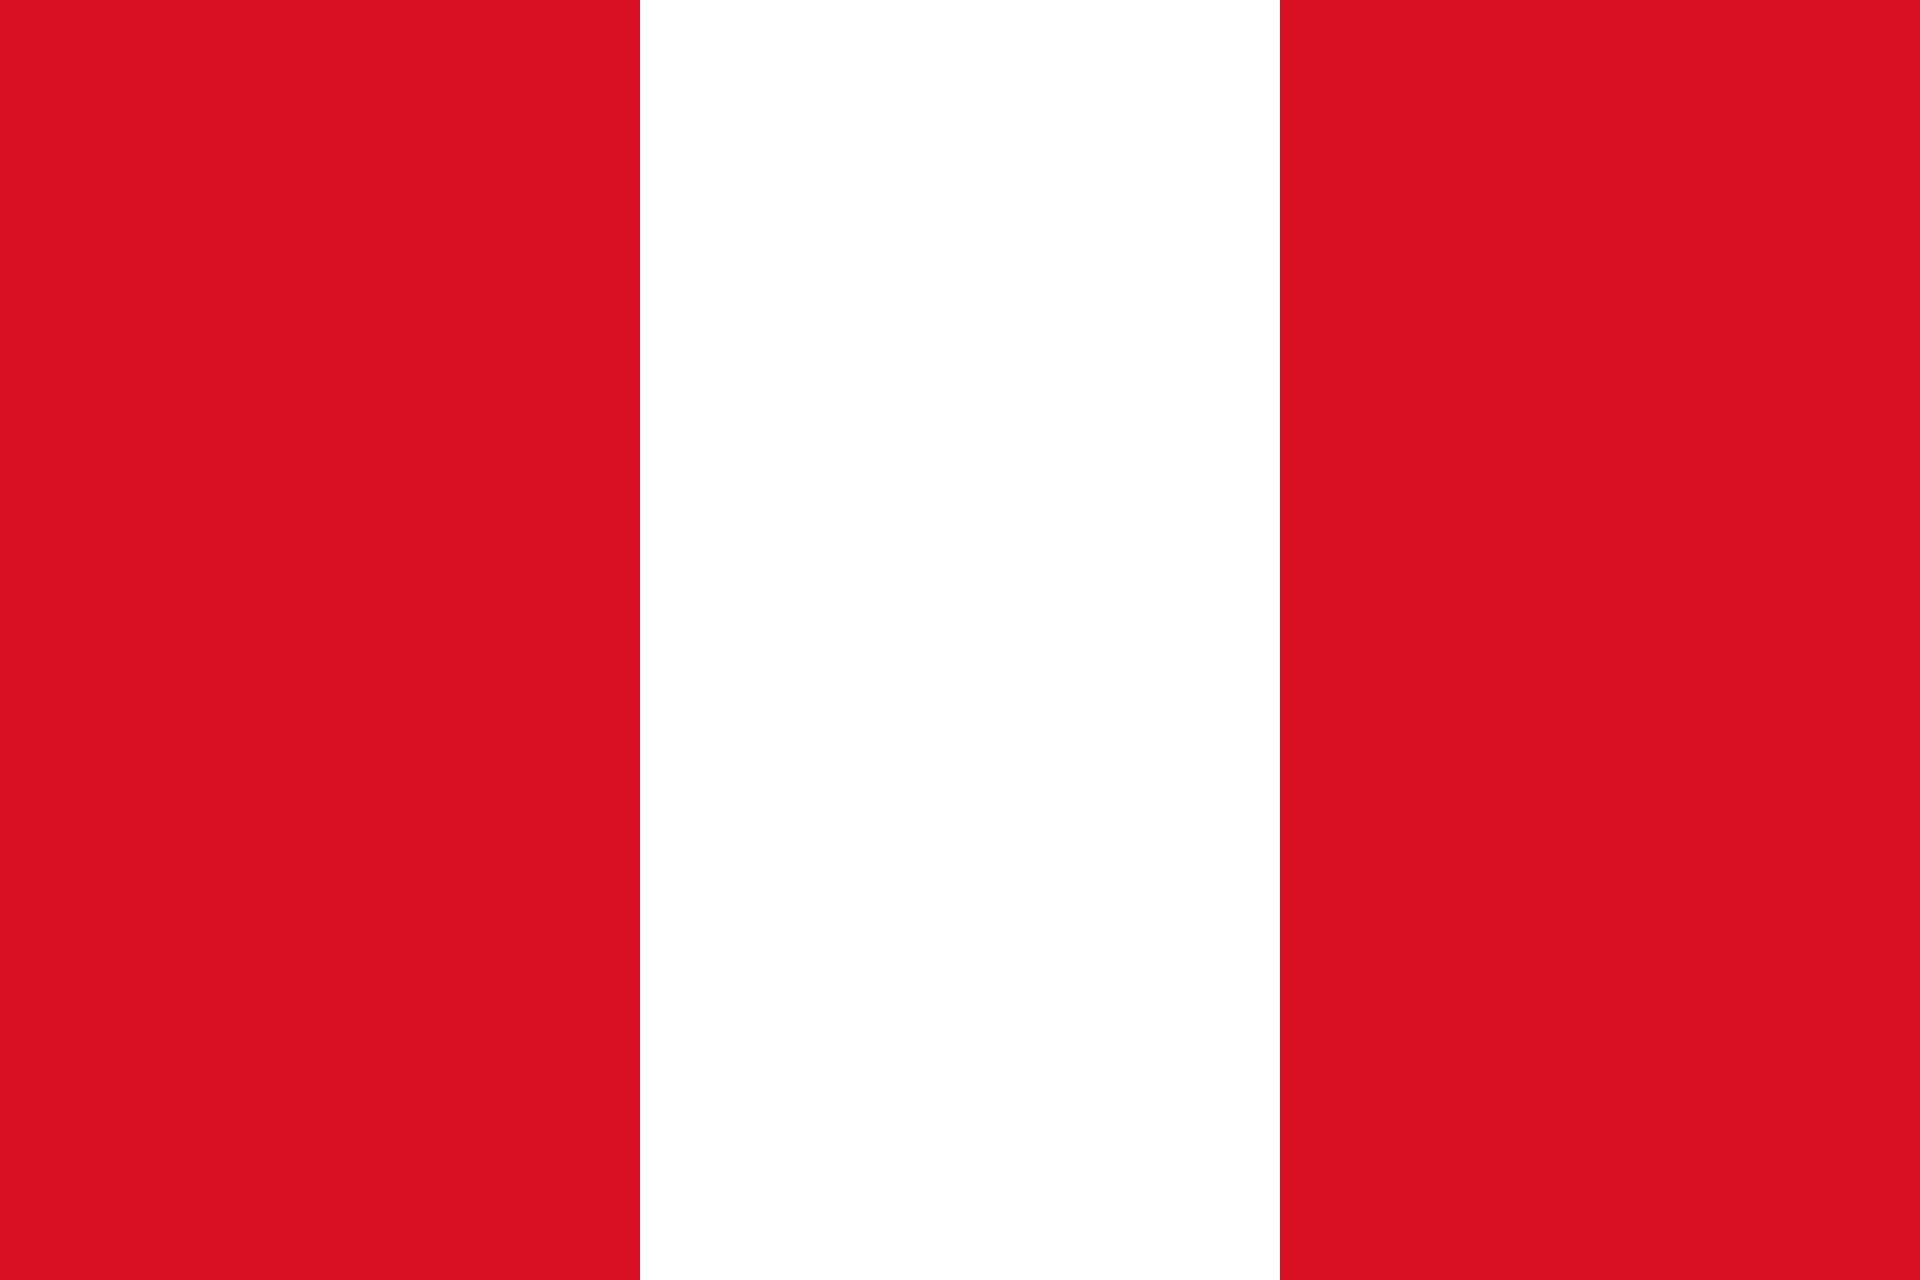 The flag of Peru has a red strip on the far right, a white strip in the middle, and a red strip on the far left.